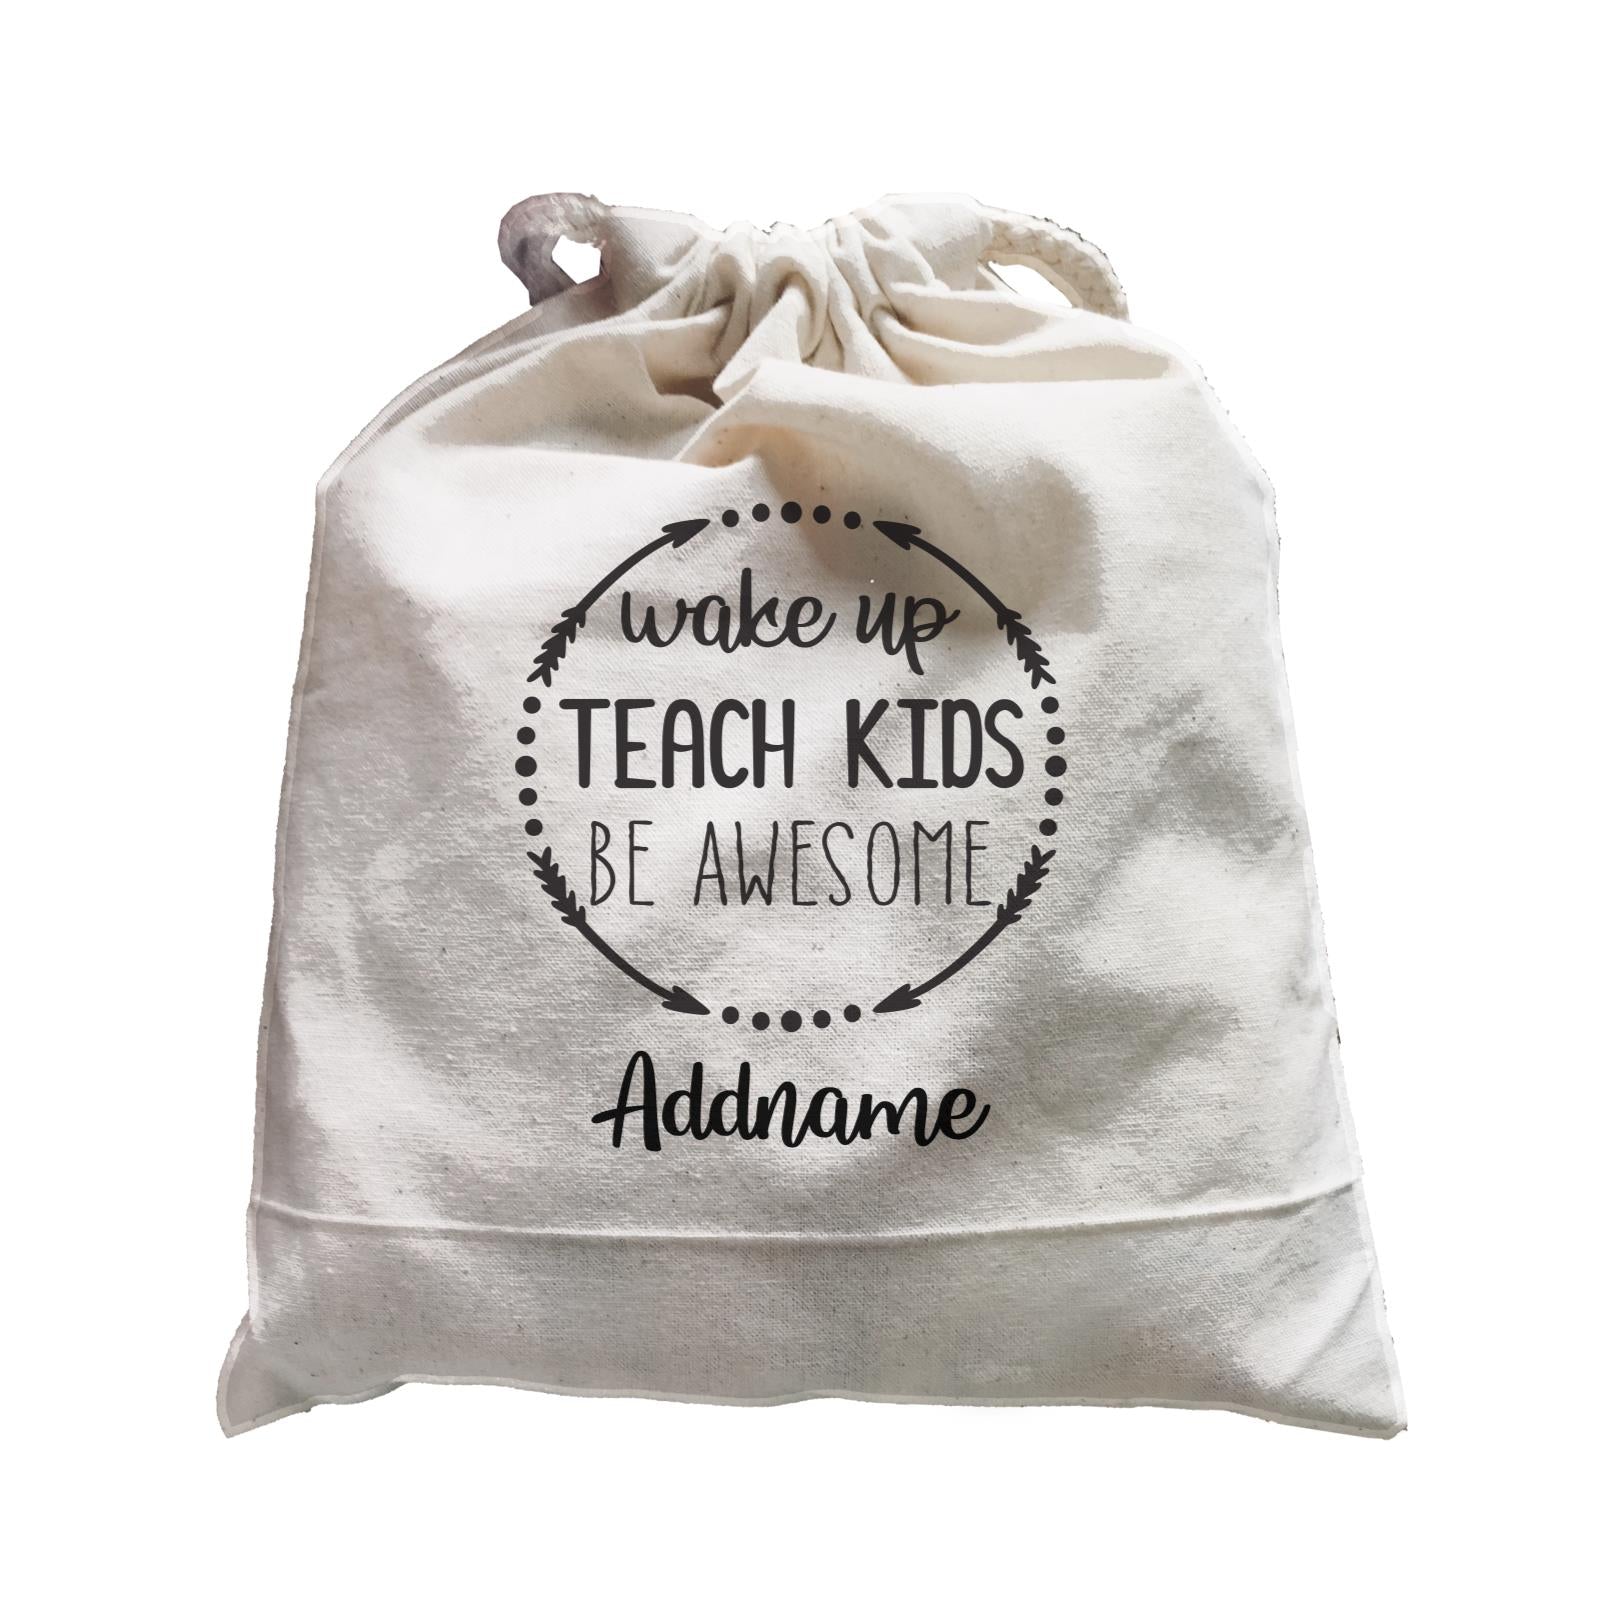 Travel Quotes Wake Up Teach Kids Be Awesome Wreath Addname Satchel